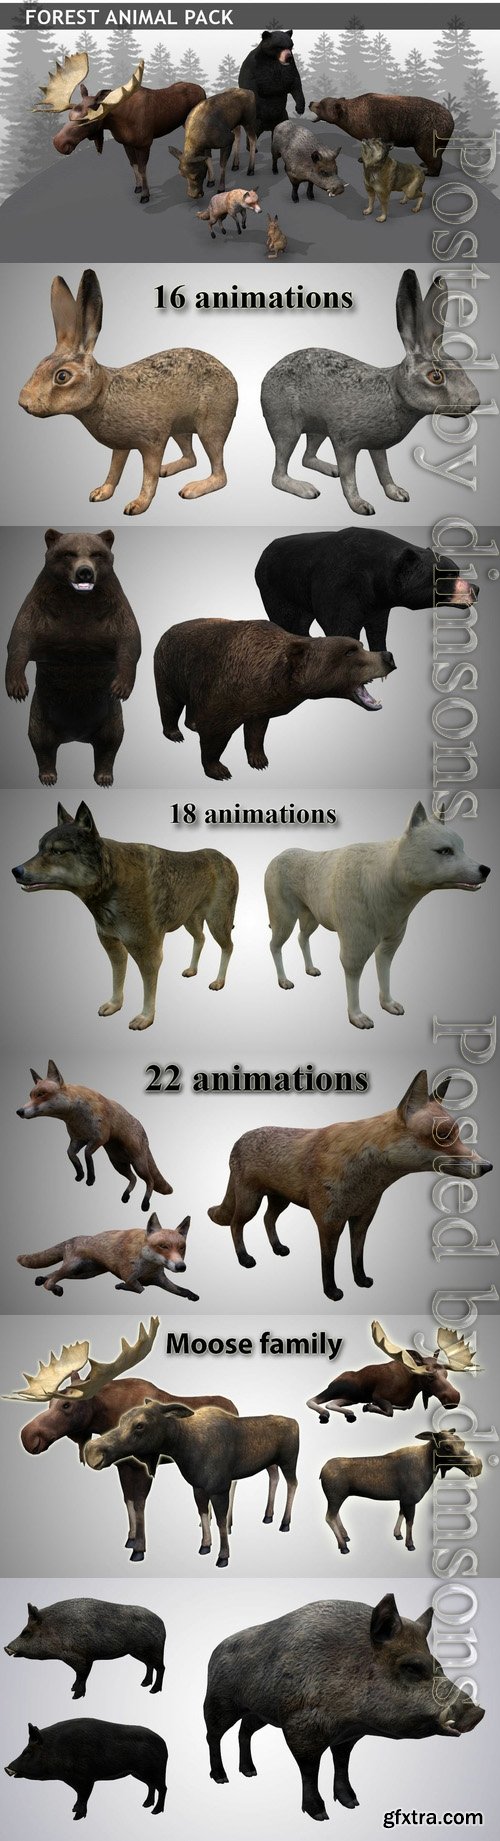 Cgtrader - Forest animals pack Low-poly 3D model